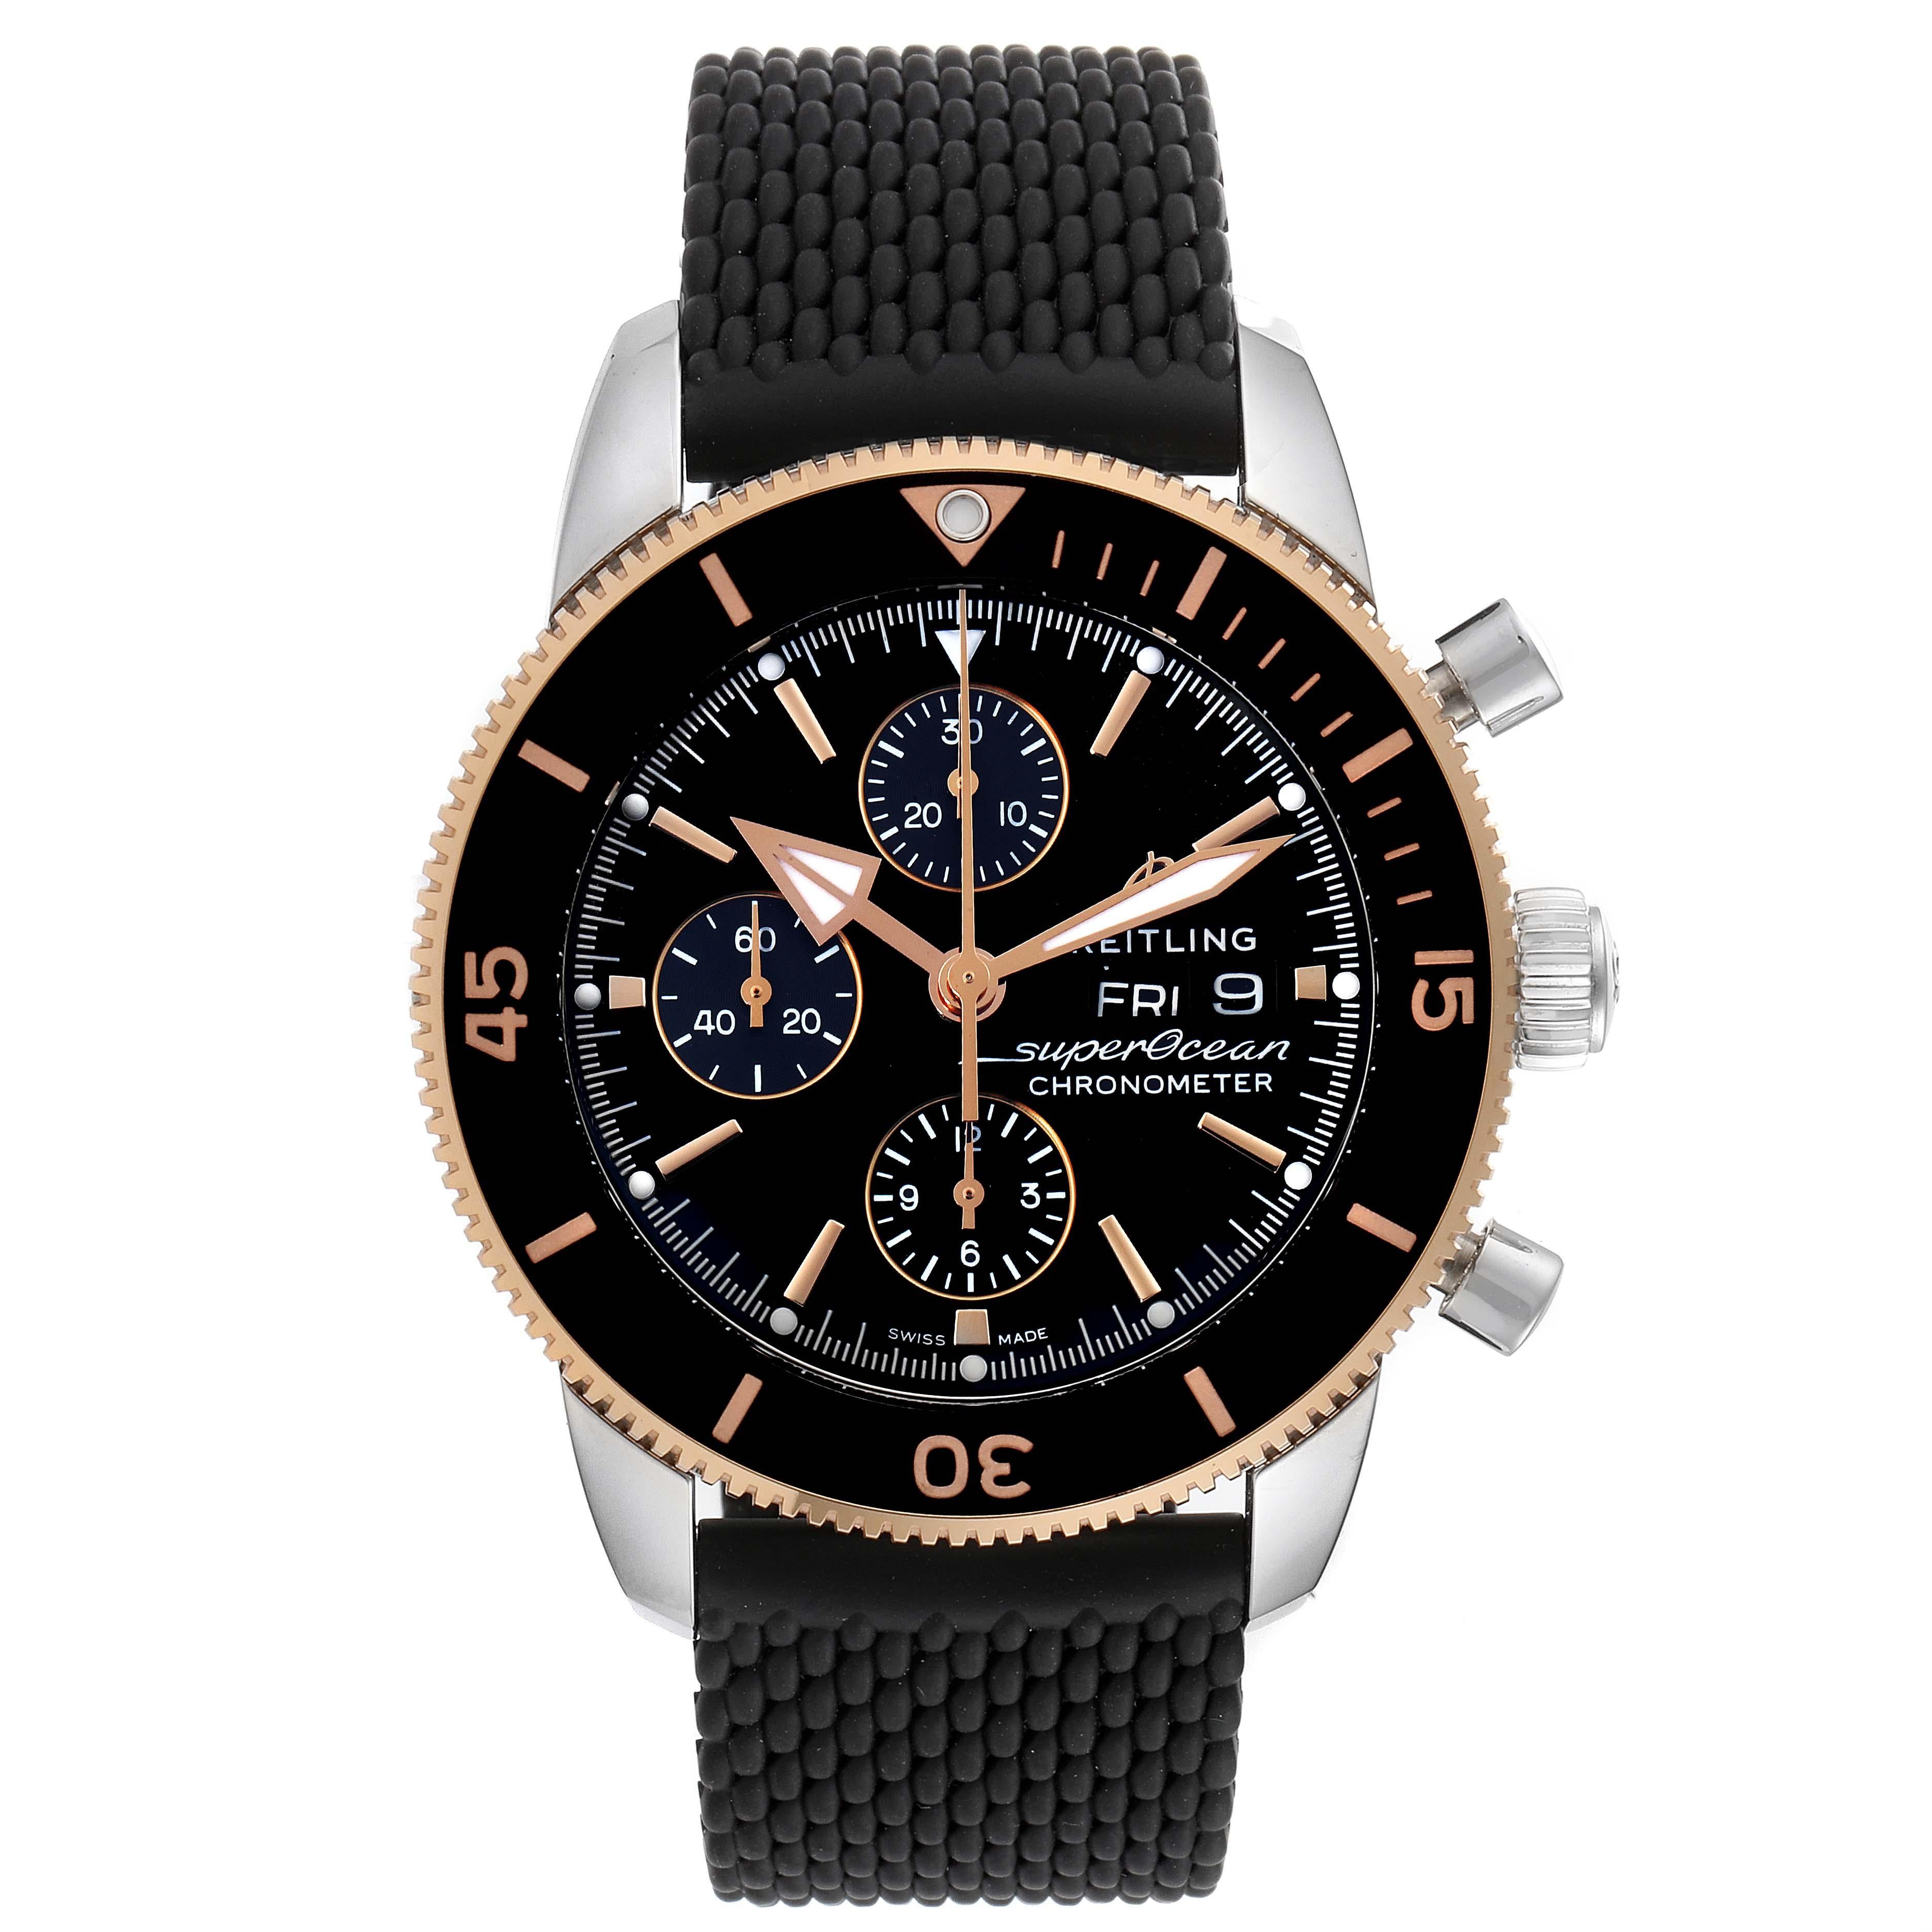 Breitling Superocean Heritage II Steel Rose Gold Watch U13313 Box Card. Authomatic self-winding chronograph movement. Stainless steel case 44.0 mm in diameter. 18K rose gold and black ceramic revolving bezel. Scratch resistant sapphire crystal.